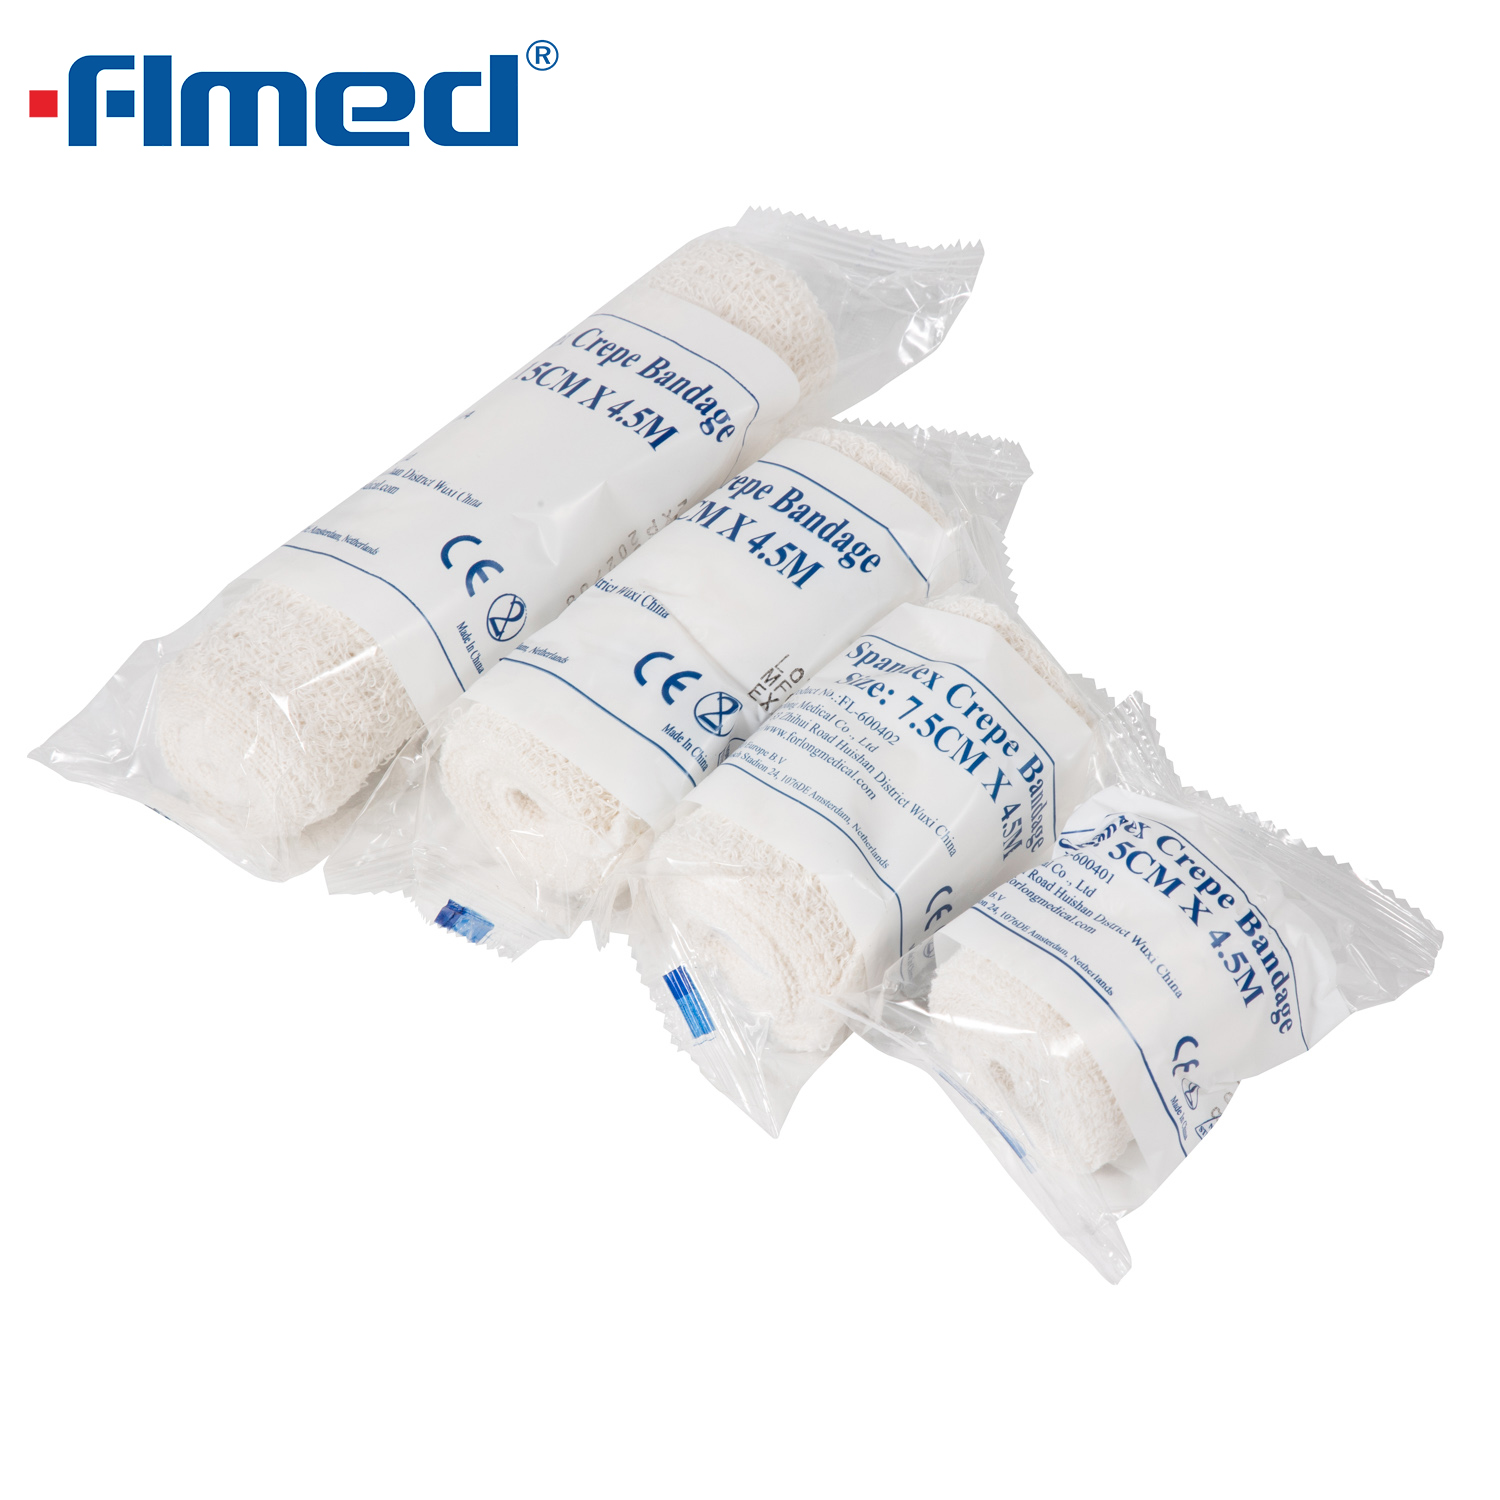 Soft Breathable And Comfortable Cotton And Spandex Crepe Bandage for Fixing Wounds Plain Bandage Elastic Bandage Clips